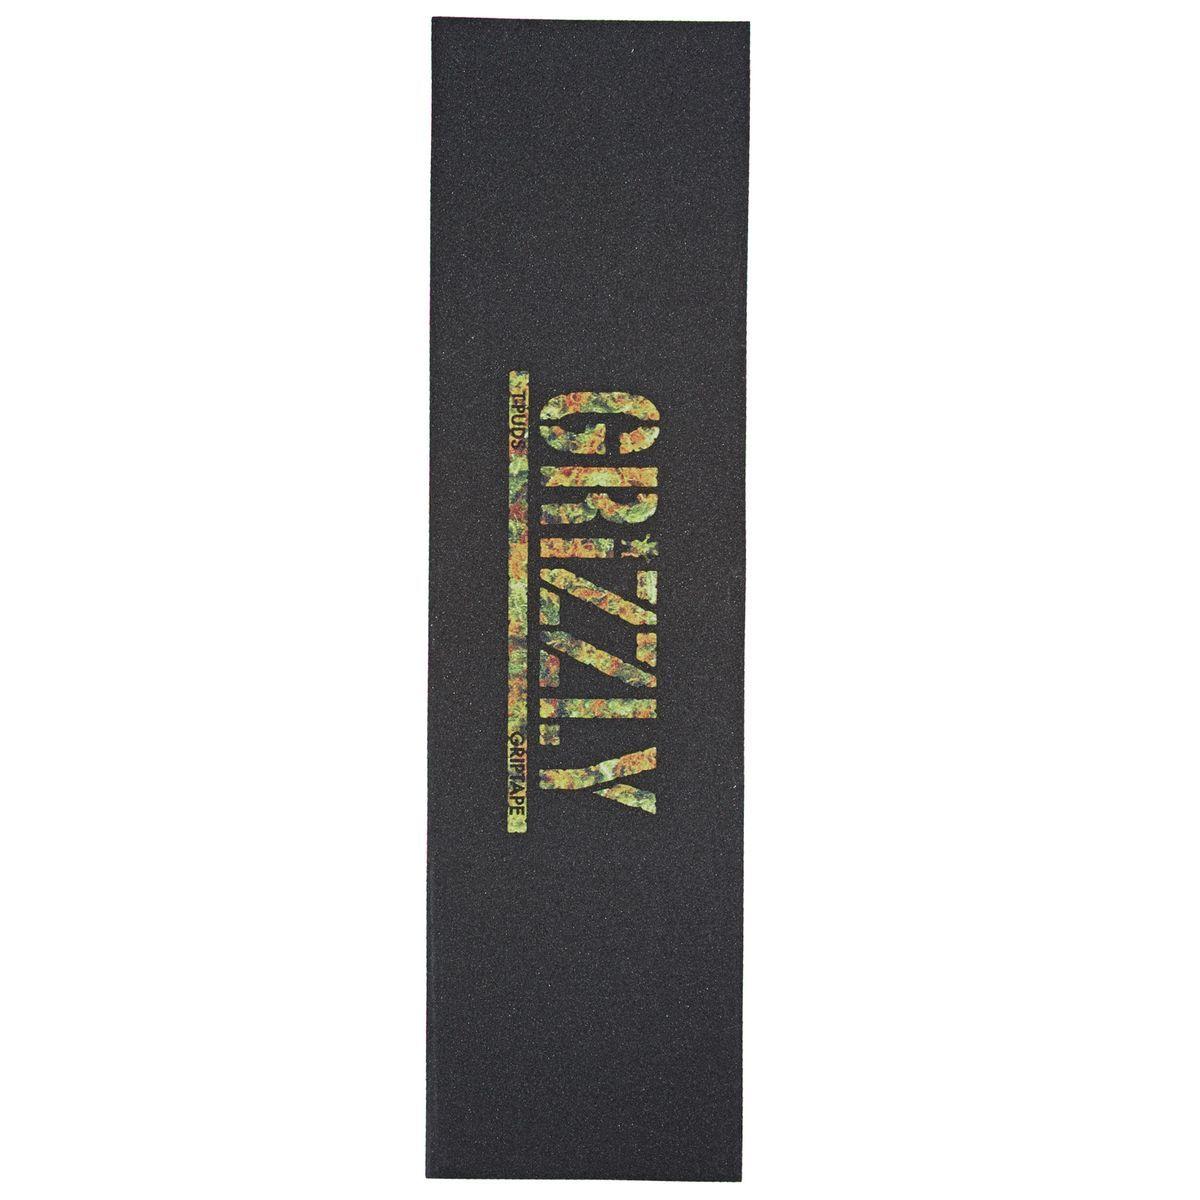 Grizzly Print Logo - Grizzly Stamp Print Griptape. Free UK Delivery* on All Orders